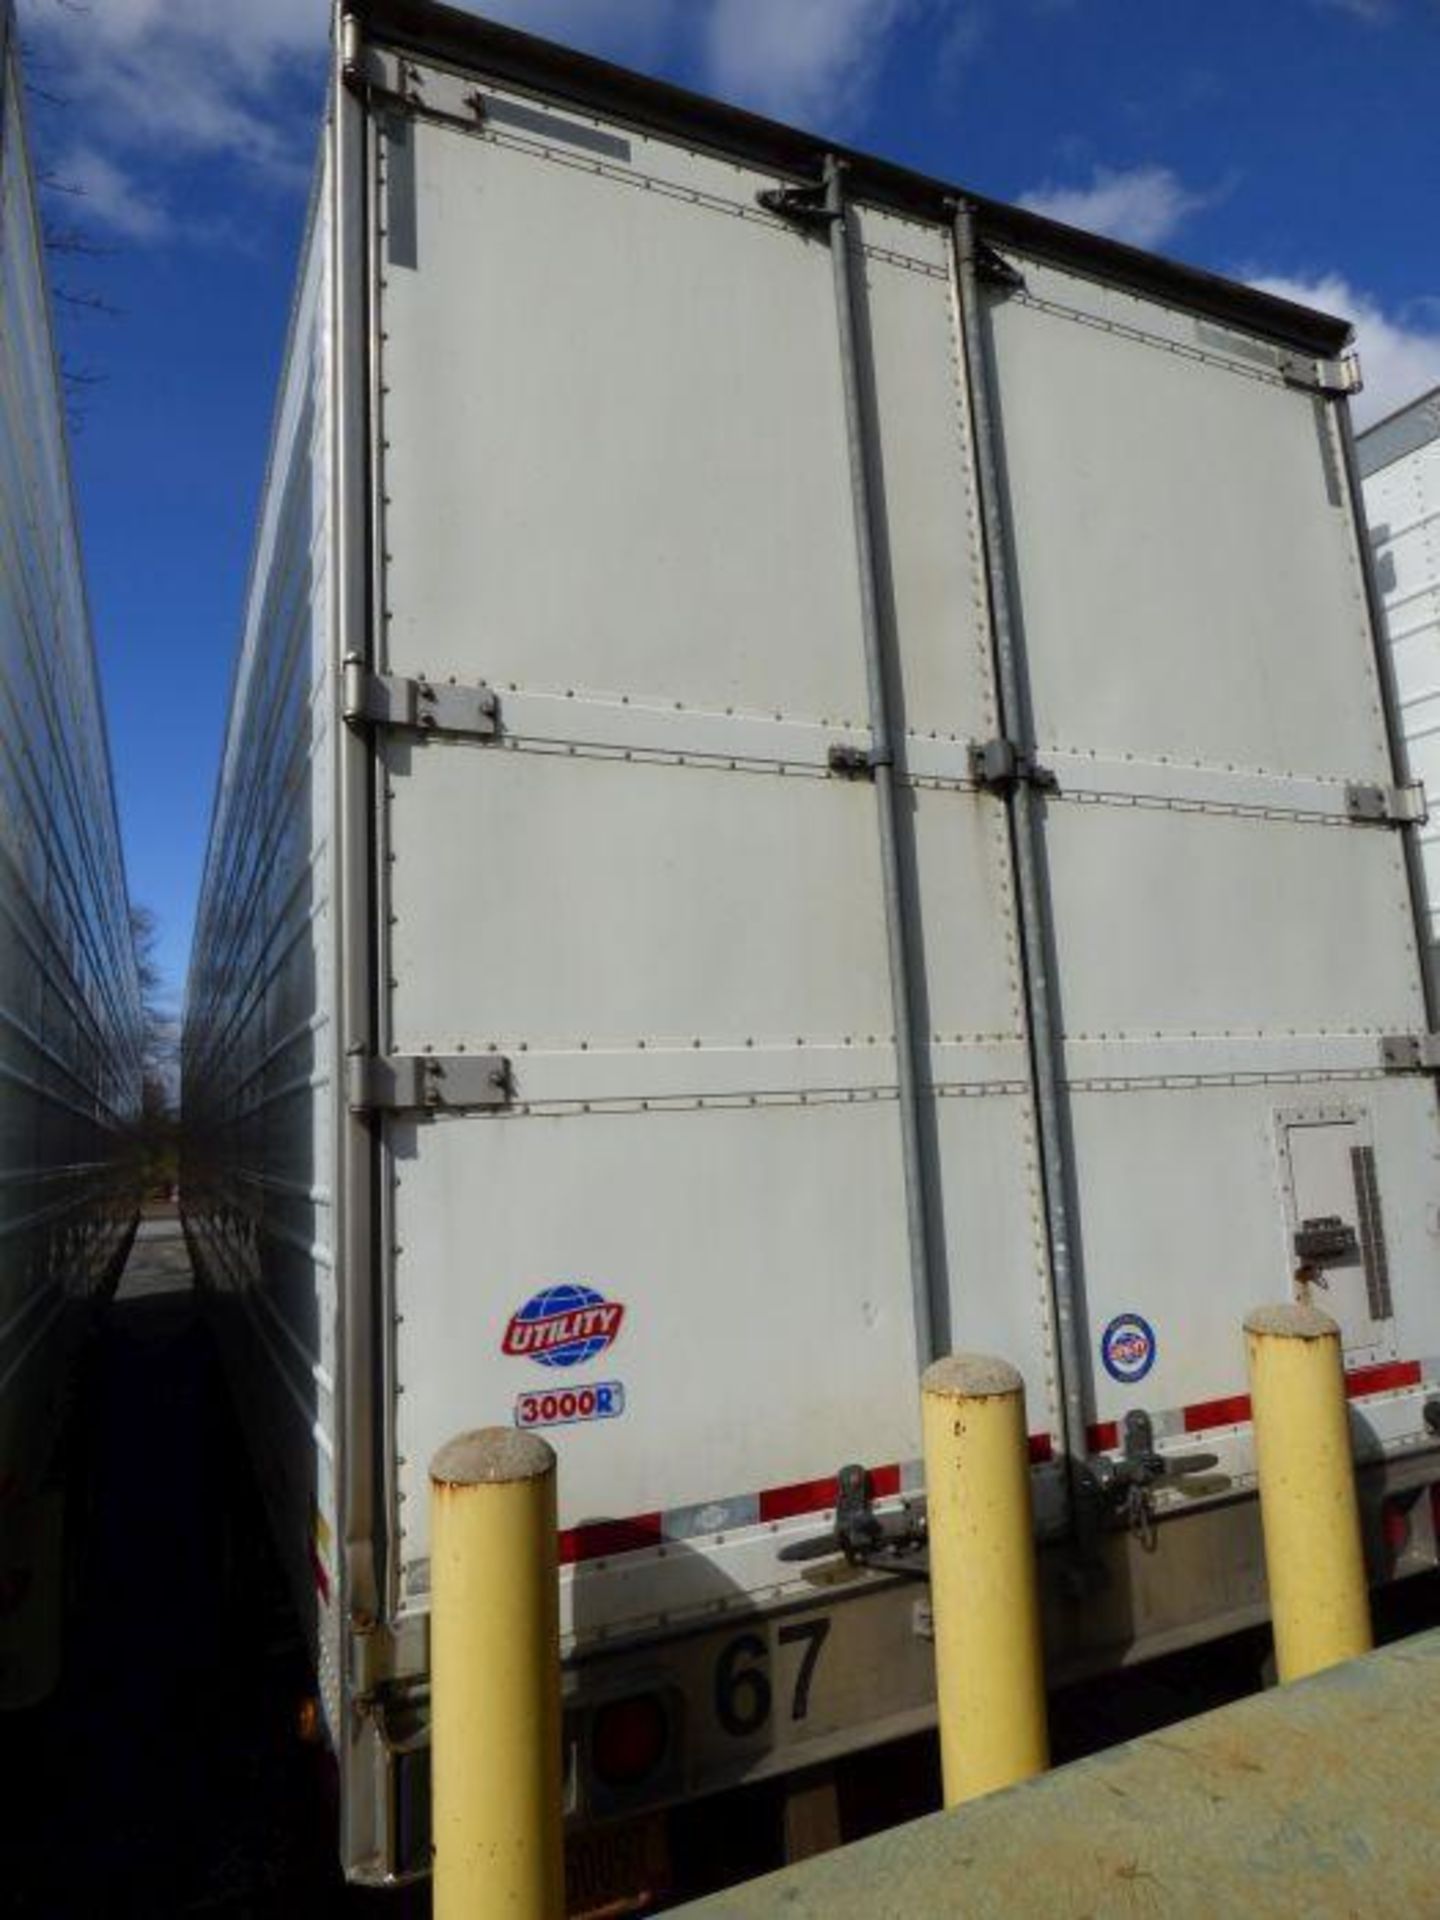 2015 Utility Reefer Trailer, 53 Foot - Image 9 of 10